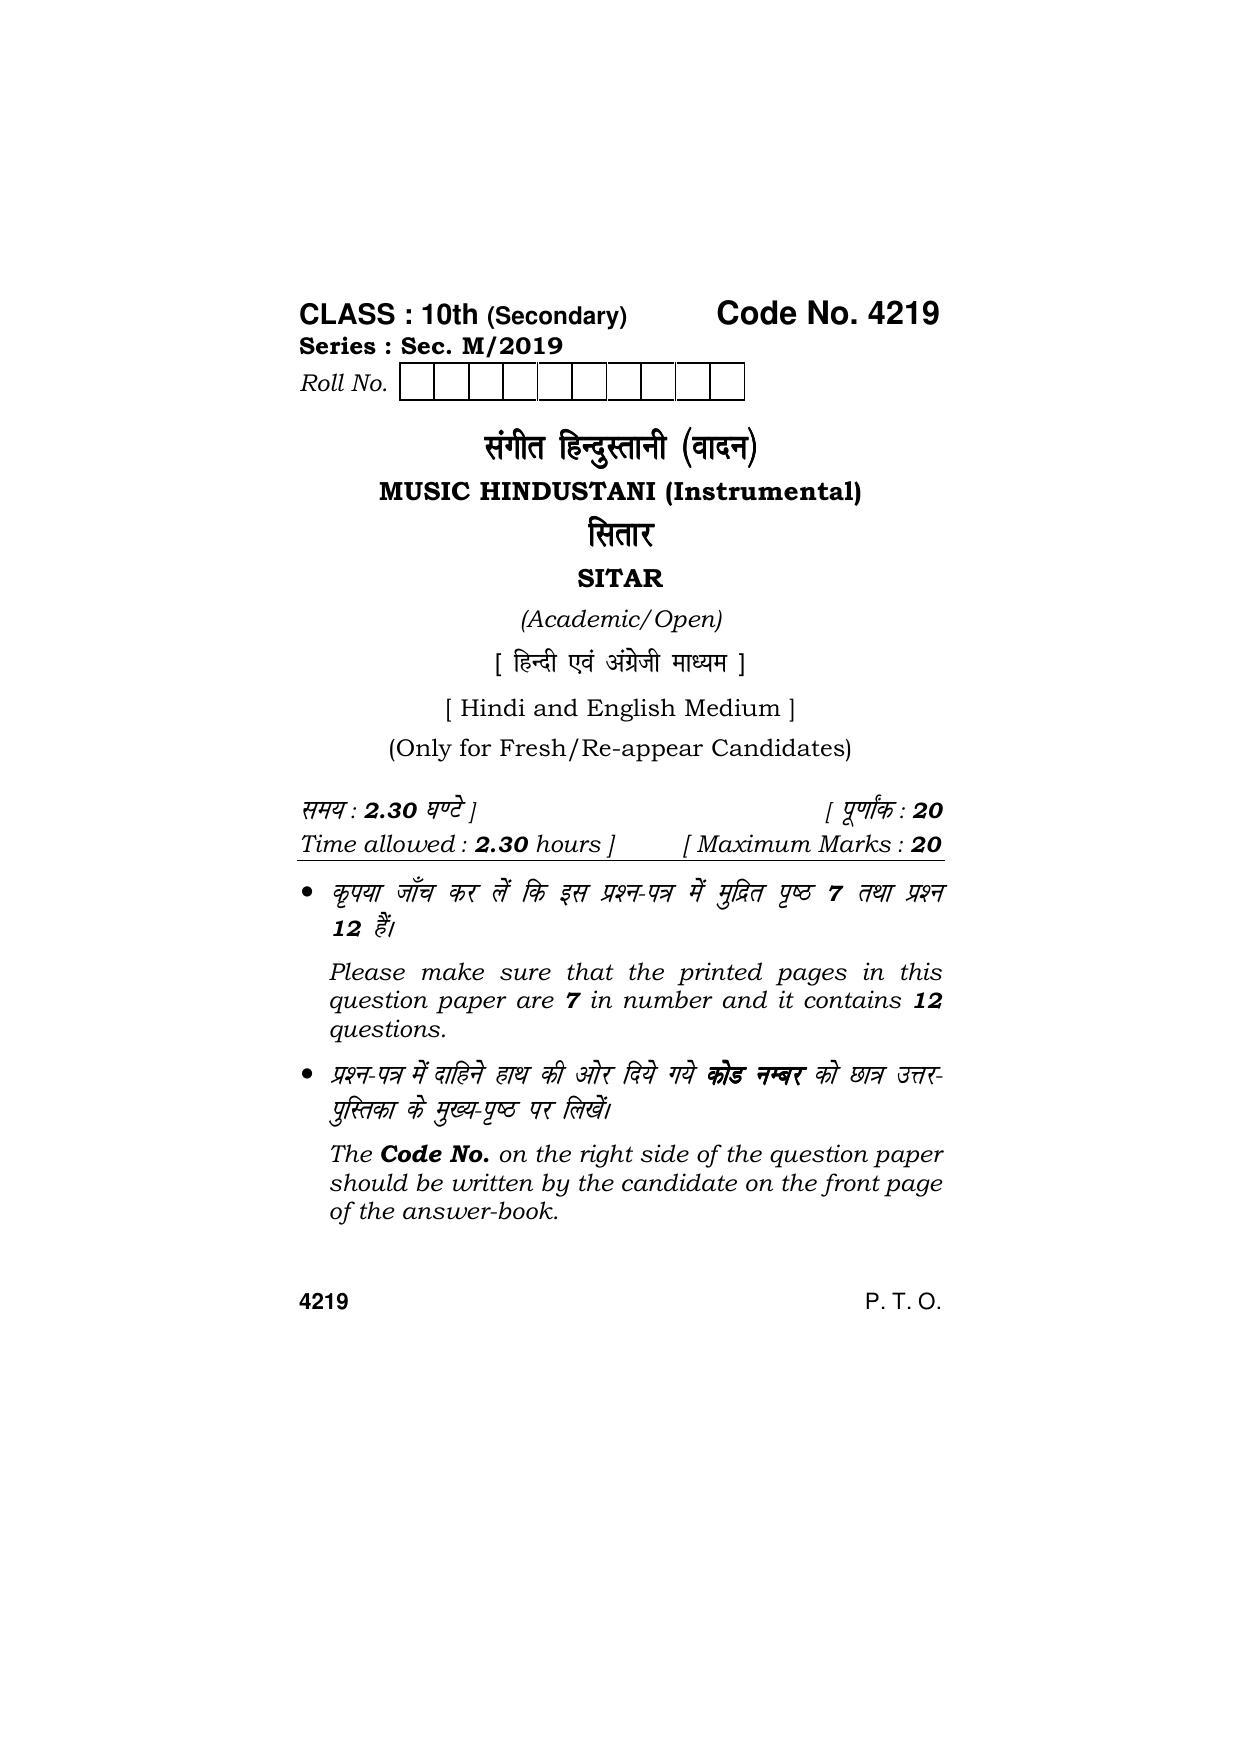 Haryana Board HBSE Class 10 Music Hindustani (Instrumental) 2019 Question Paper - Page 1